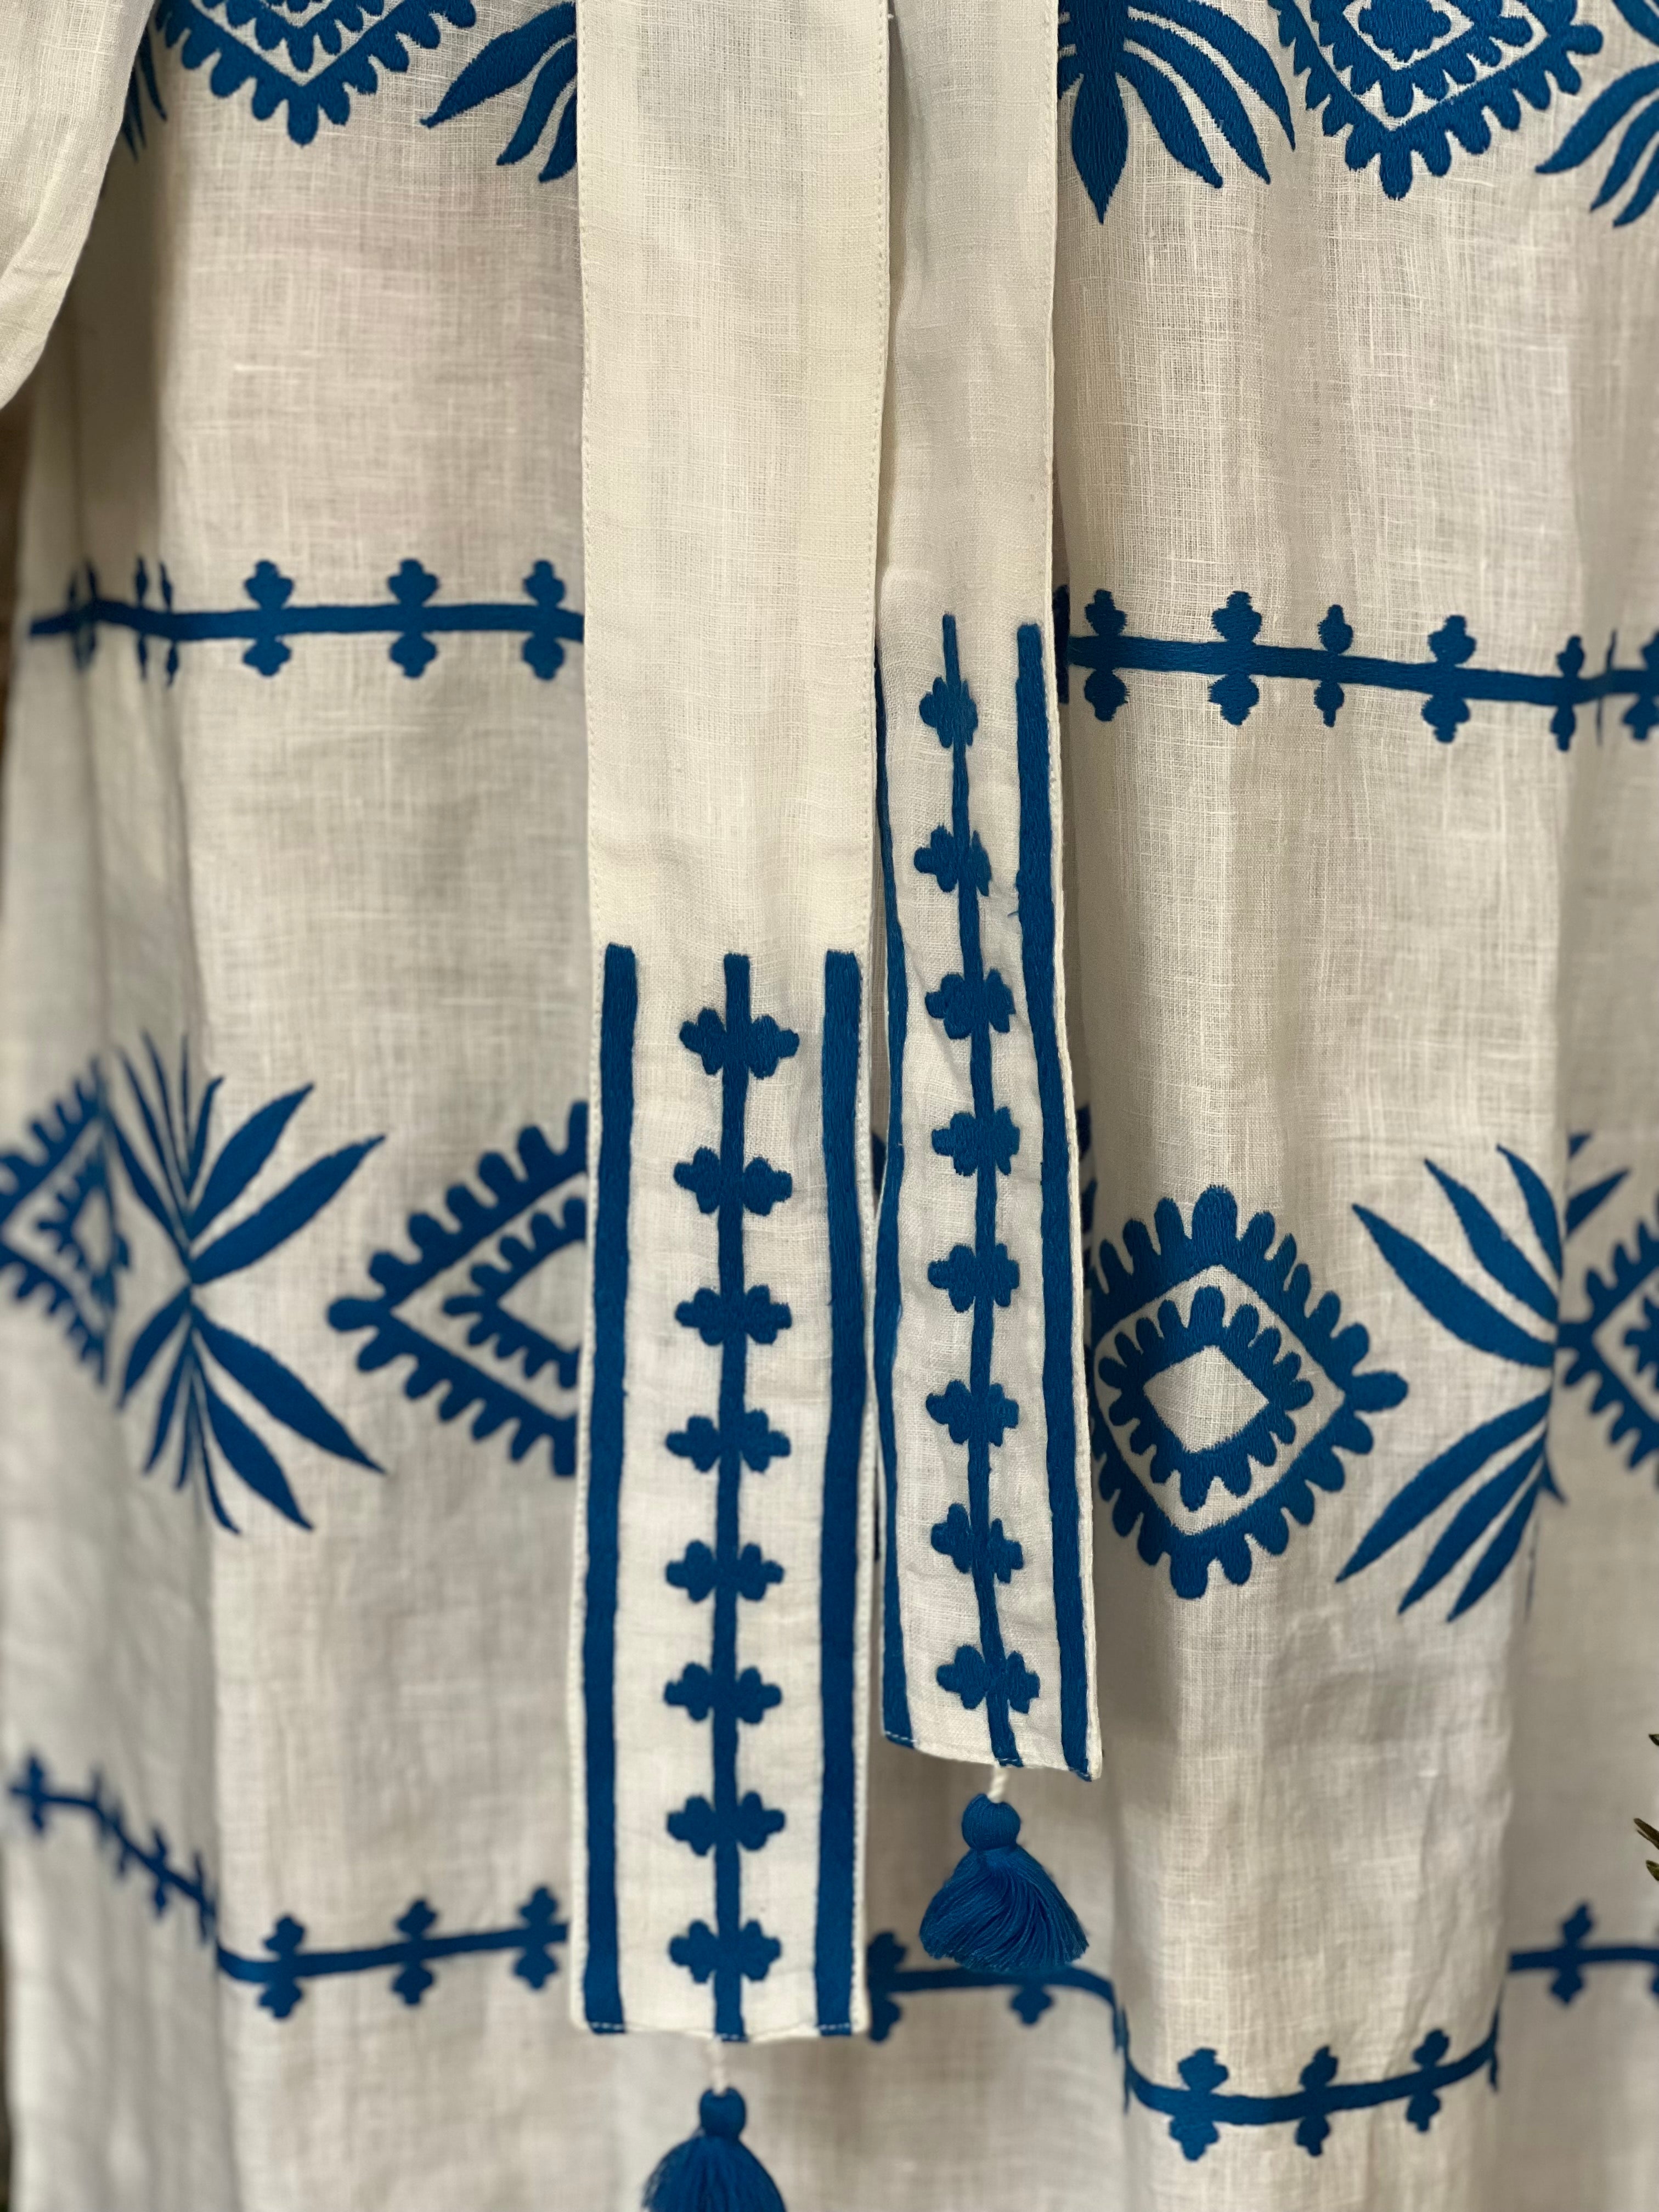 white and blue 100% linen kaftan hand embroidered and made in India